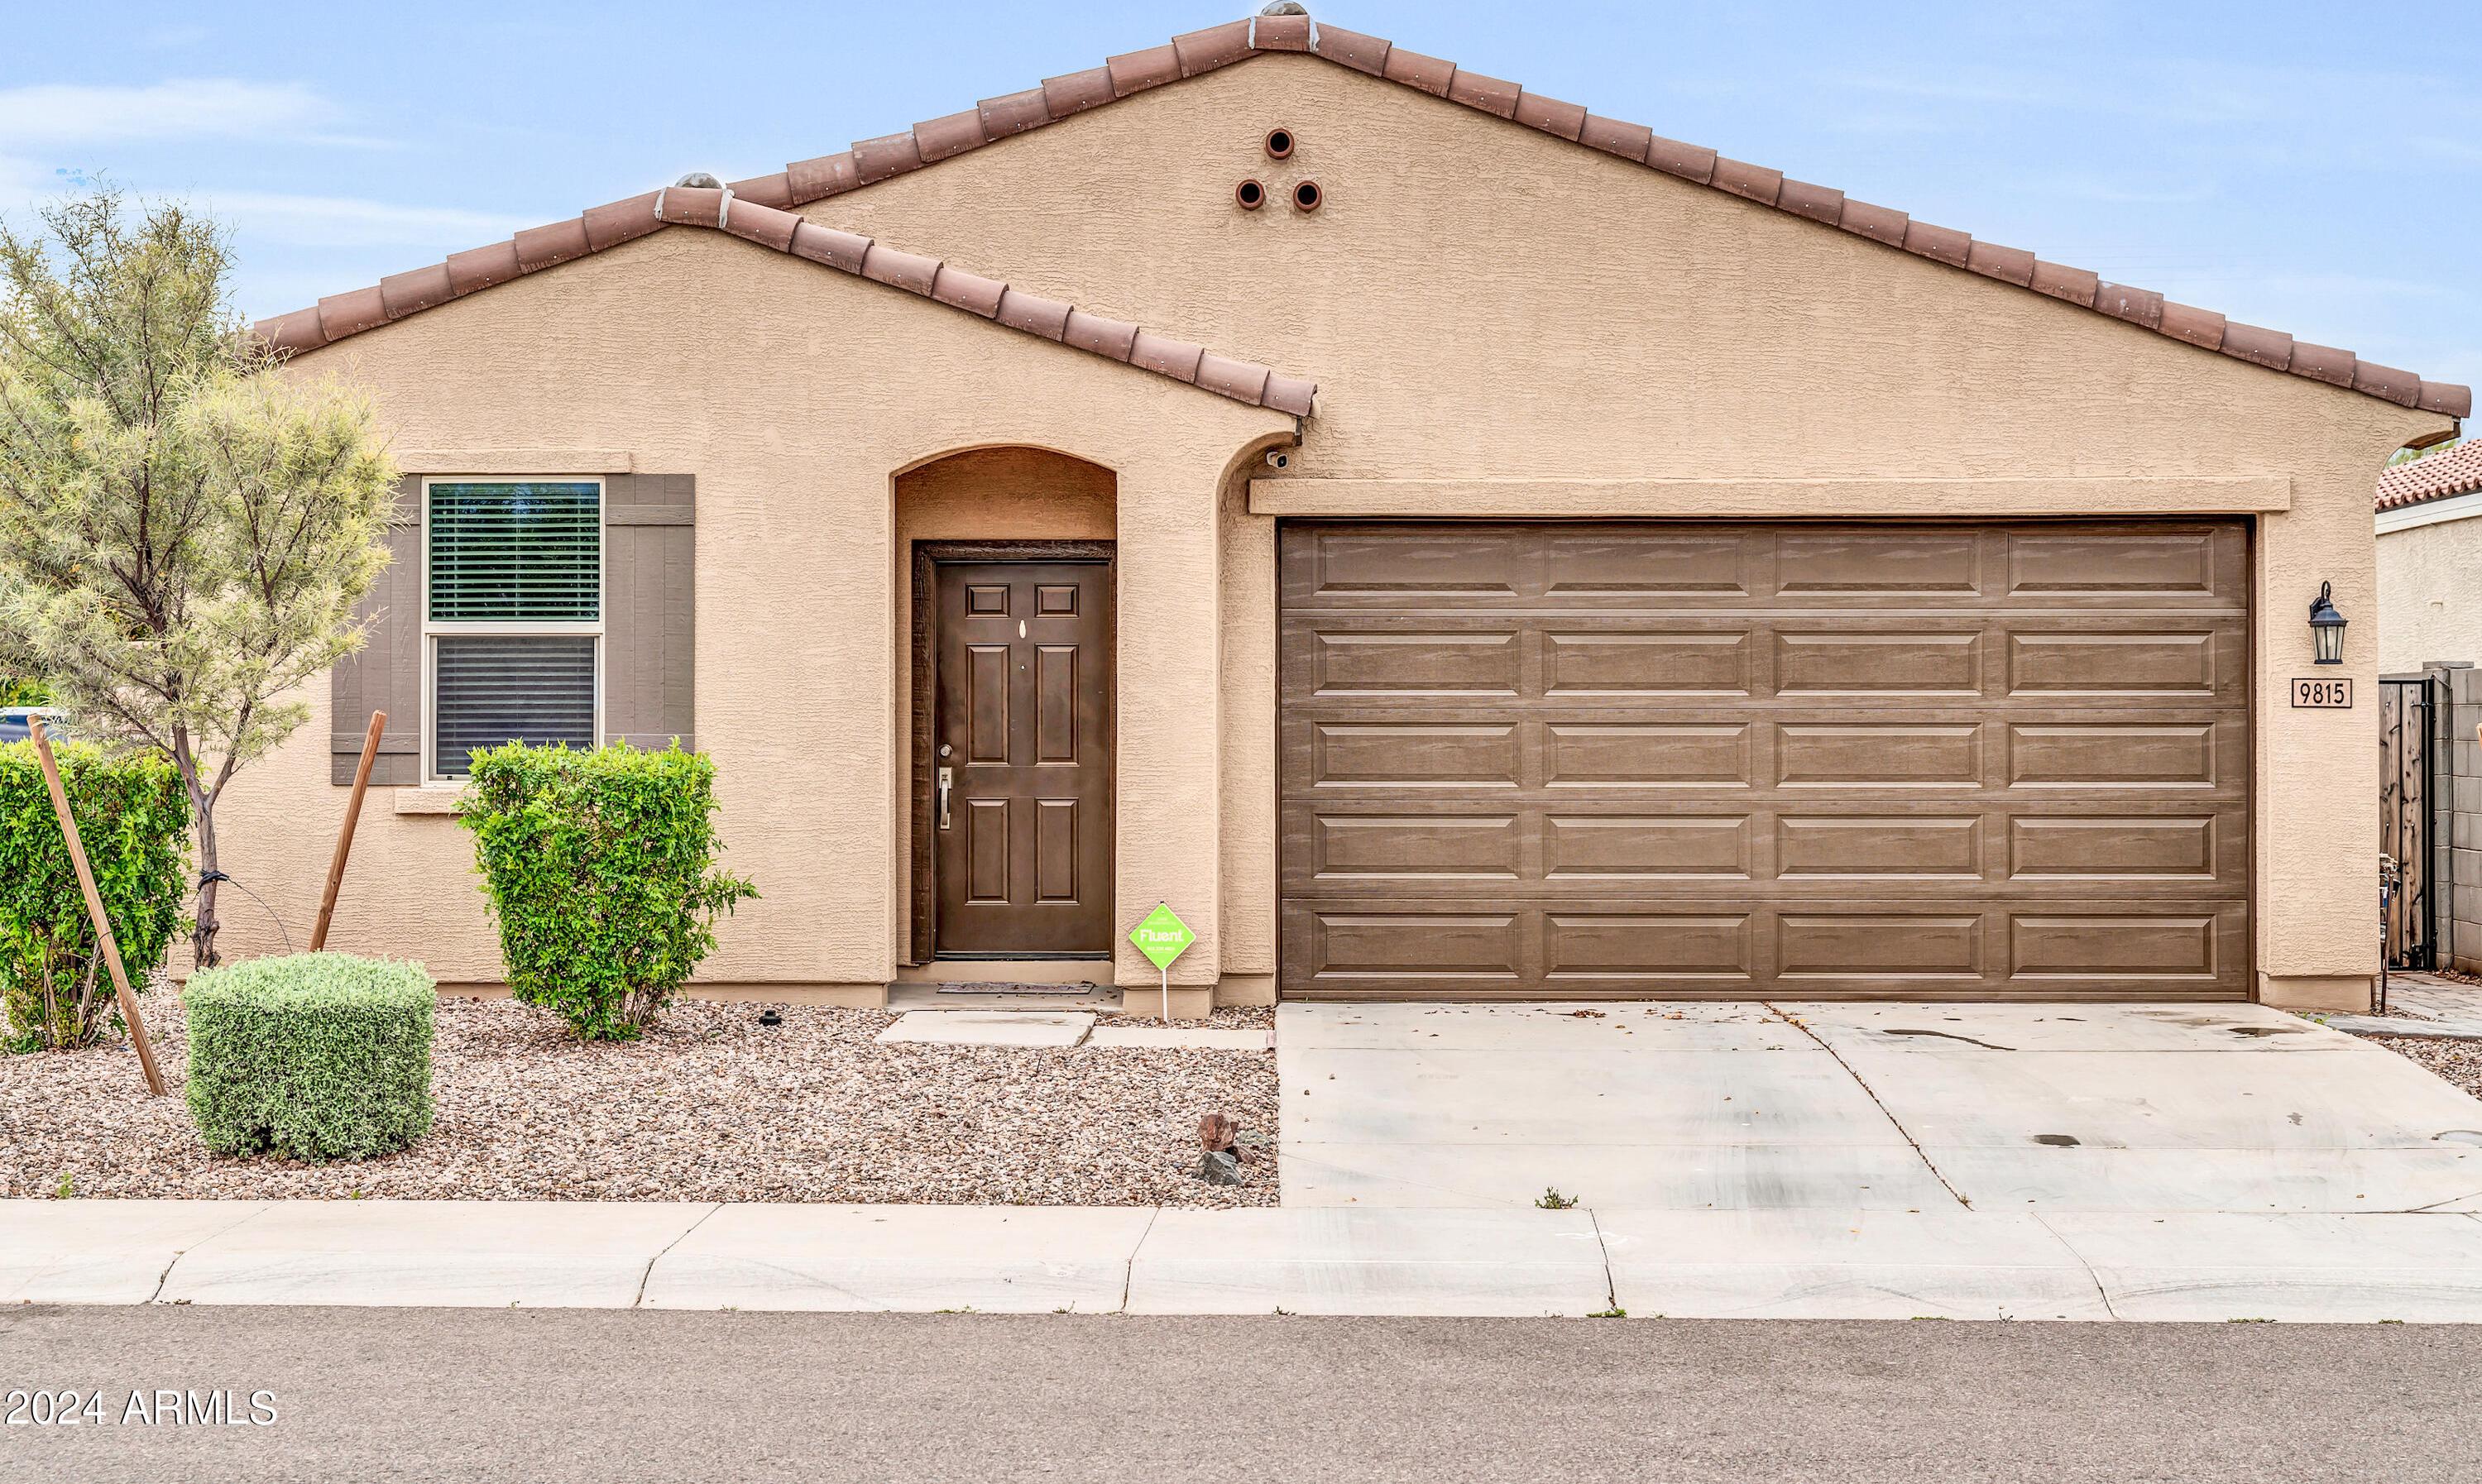 Photo one of 9815 W Getty Dr Tolleson AZ 85353 | MLS 6686026